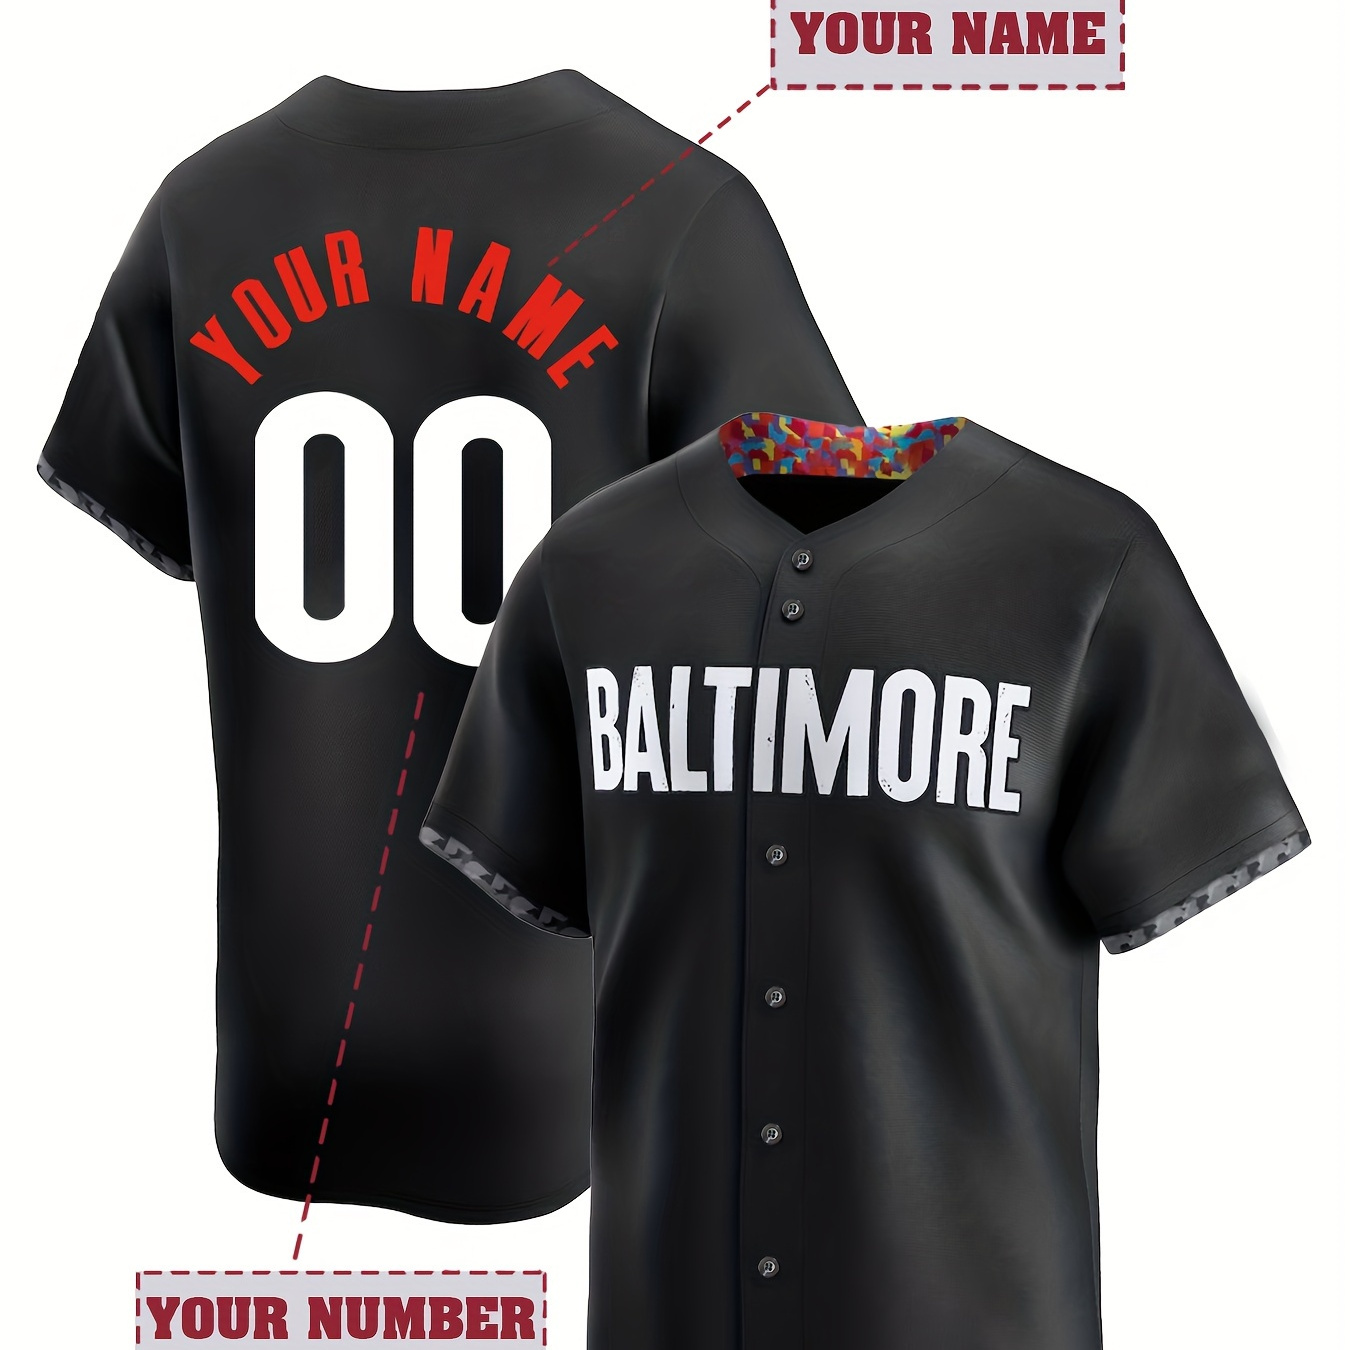 

Customized Name And Number, Men's Short Sleeve V-neck Baltimore Baseball Jersey, Comfy Top For Training And Competition